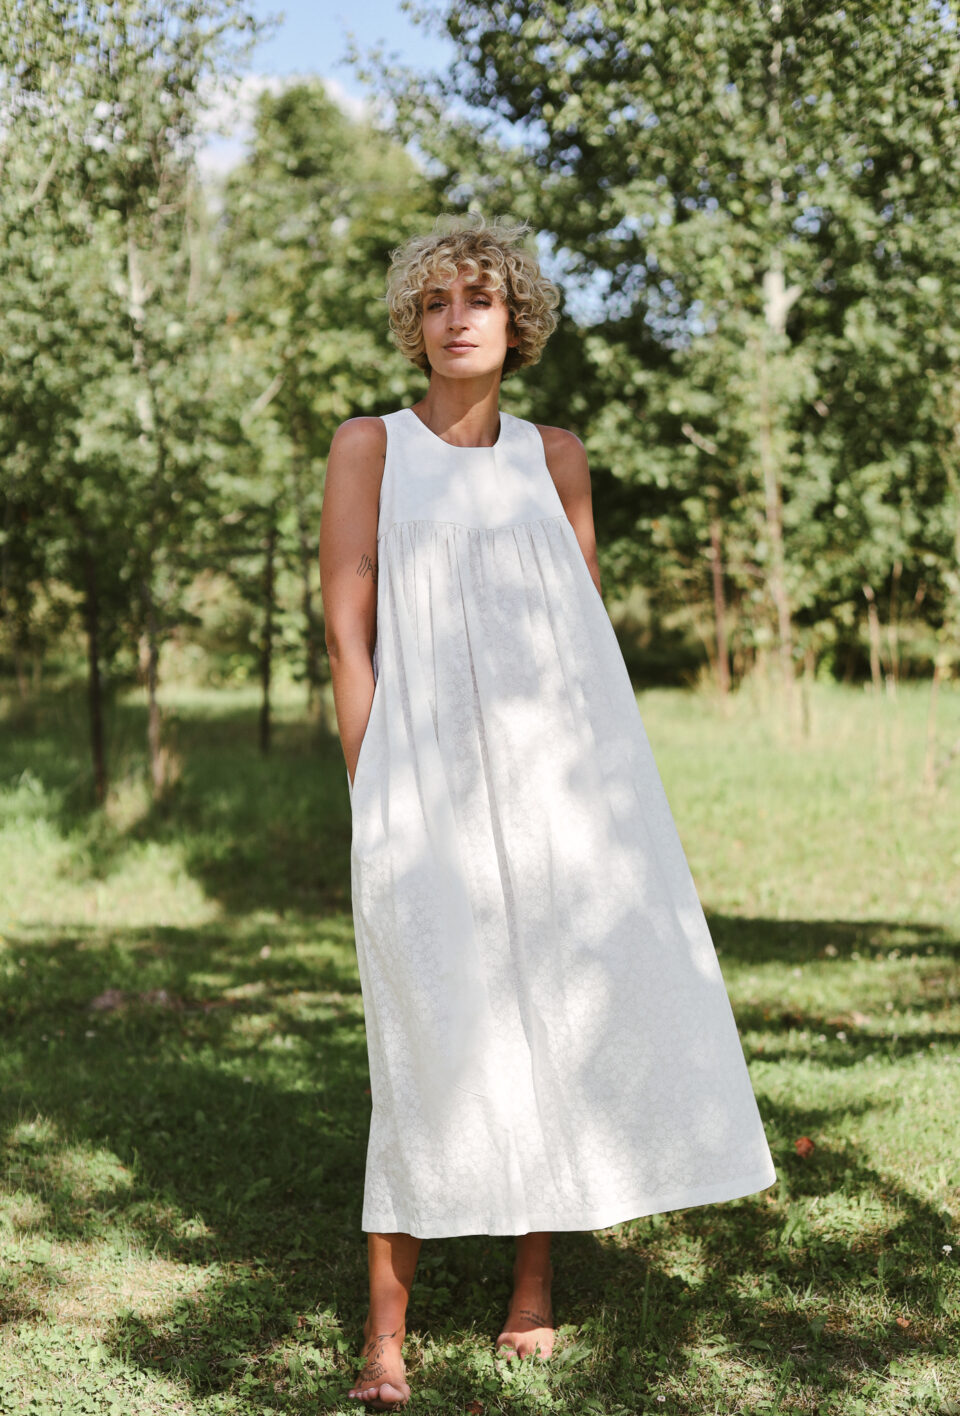 White floral cotton sleeveless Maxi dress LILOU | Dress | Sustainable clothing | OffOn clothing